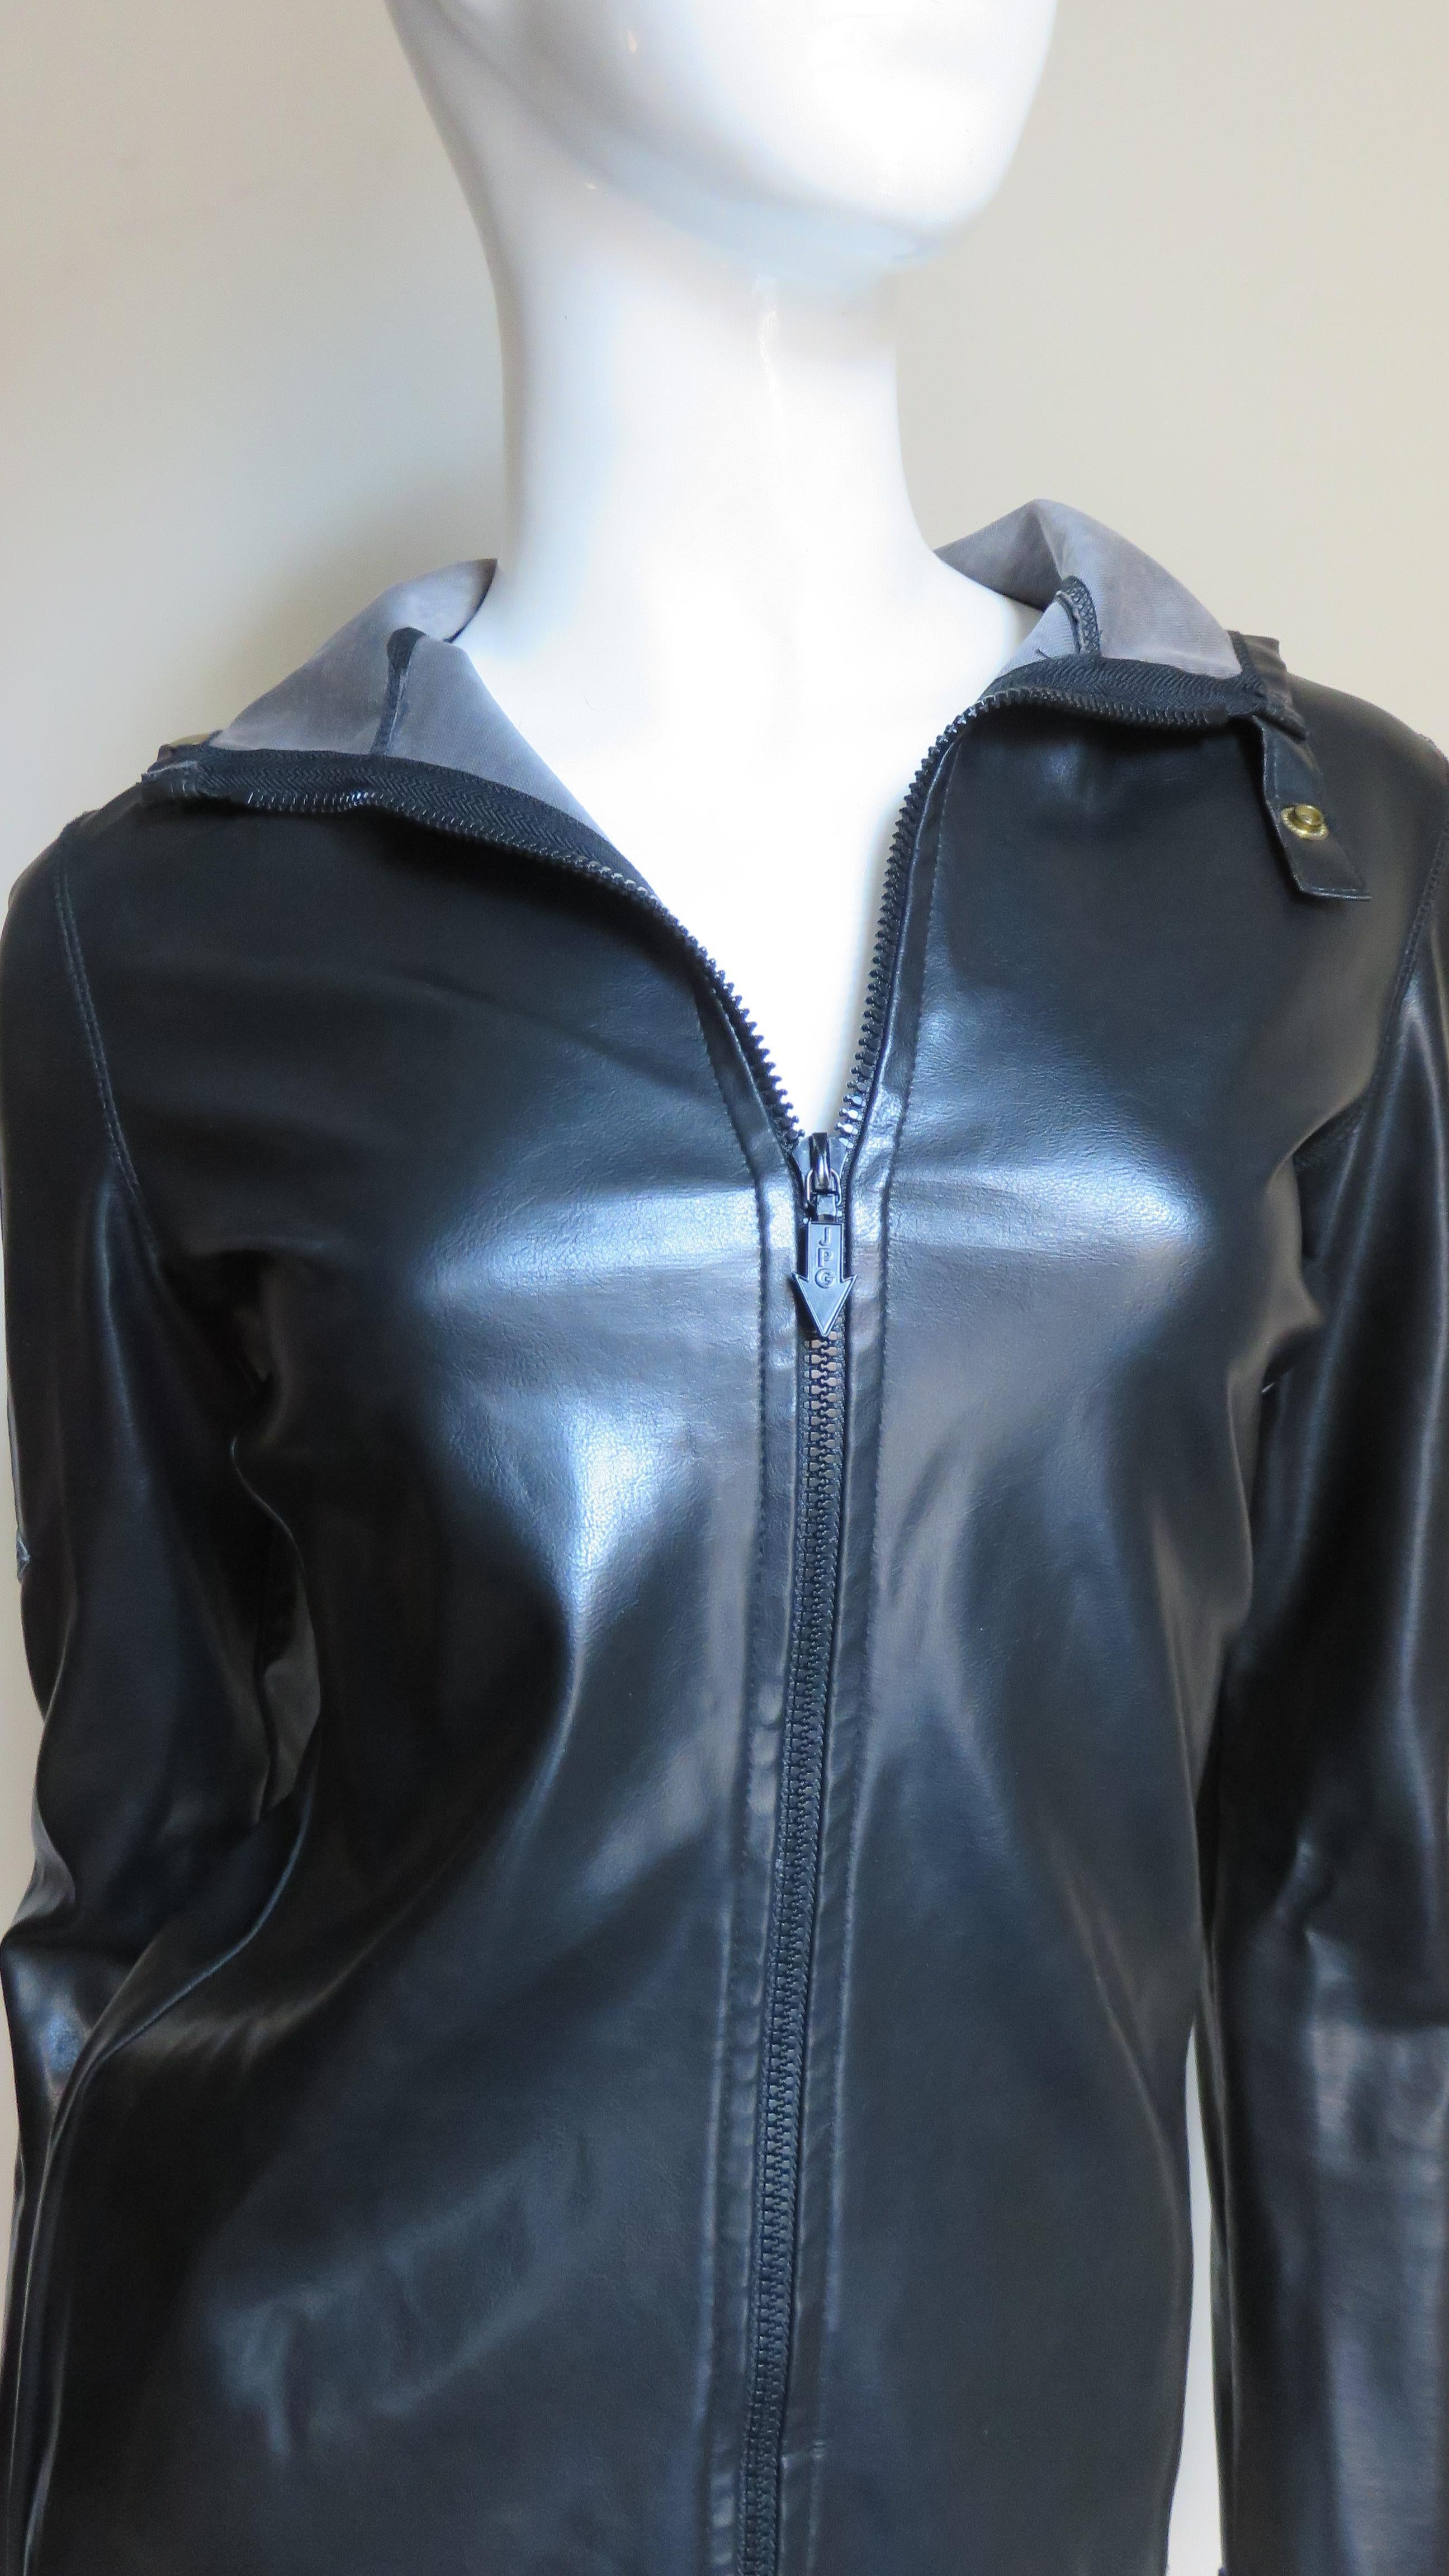 A fabulous black polyurethane jacket from Jean Paul Gaultier's JPG collection.  It has a hood, snap tab at the neck and long sleeves with padded arrow appliques along the upper arms, a front zipper and it is unlined.
Fits Extra Small, Small.  Marked